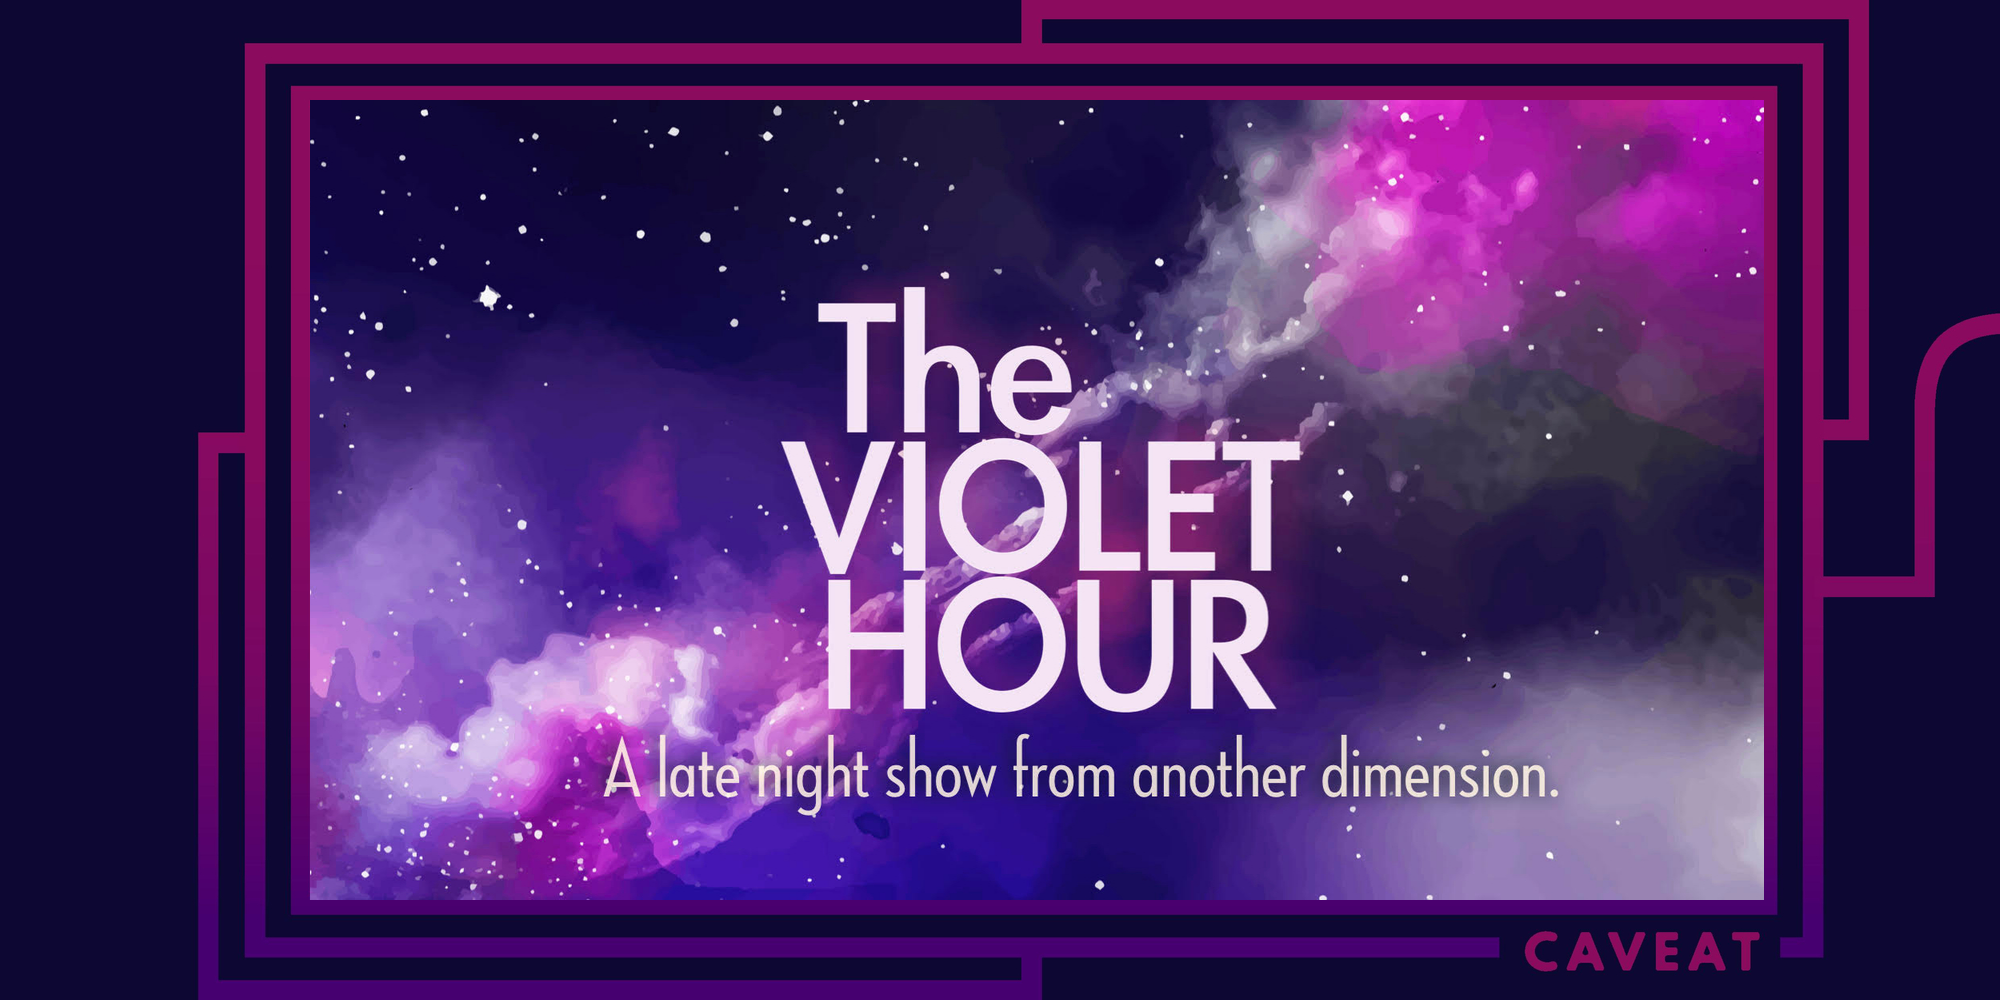 The Violet Hour: A Late Night Show From Another Dimension